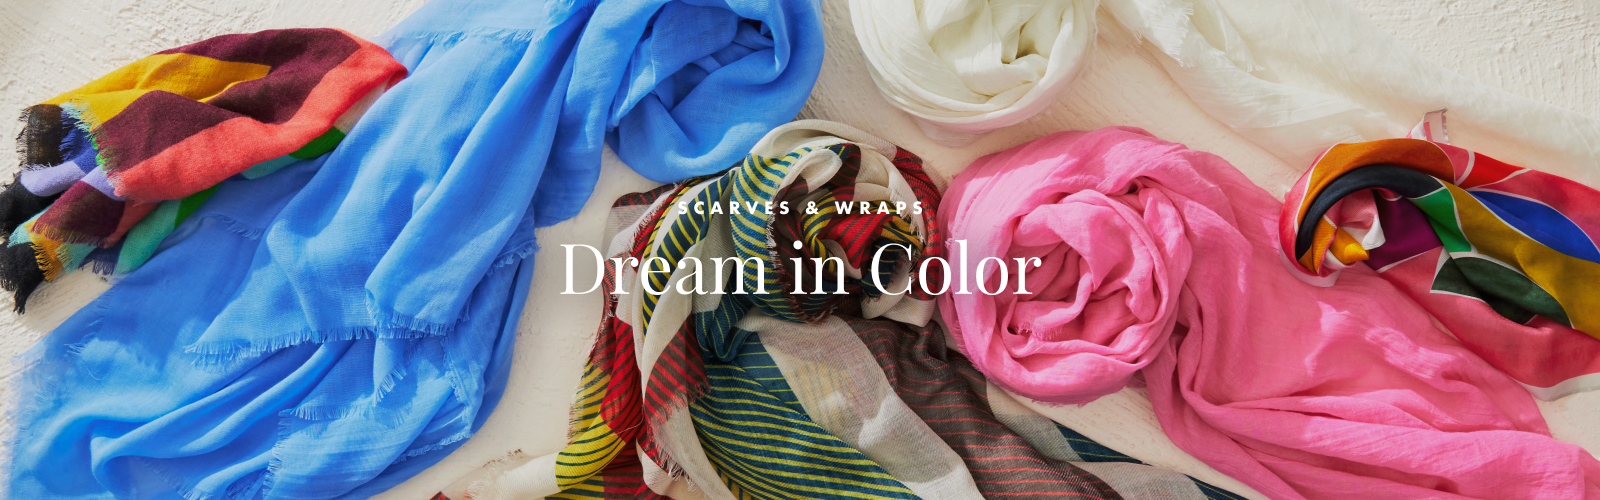 Scarves & Wraps: Dream in Color